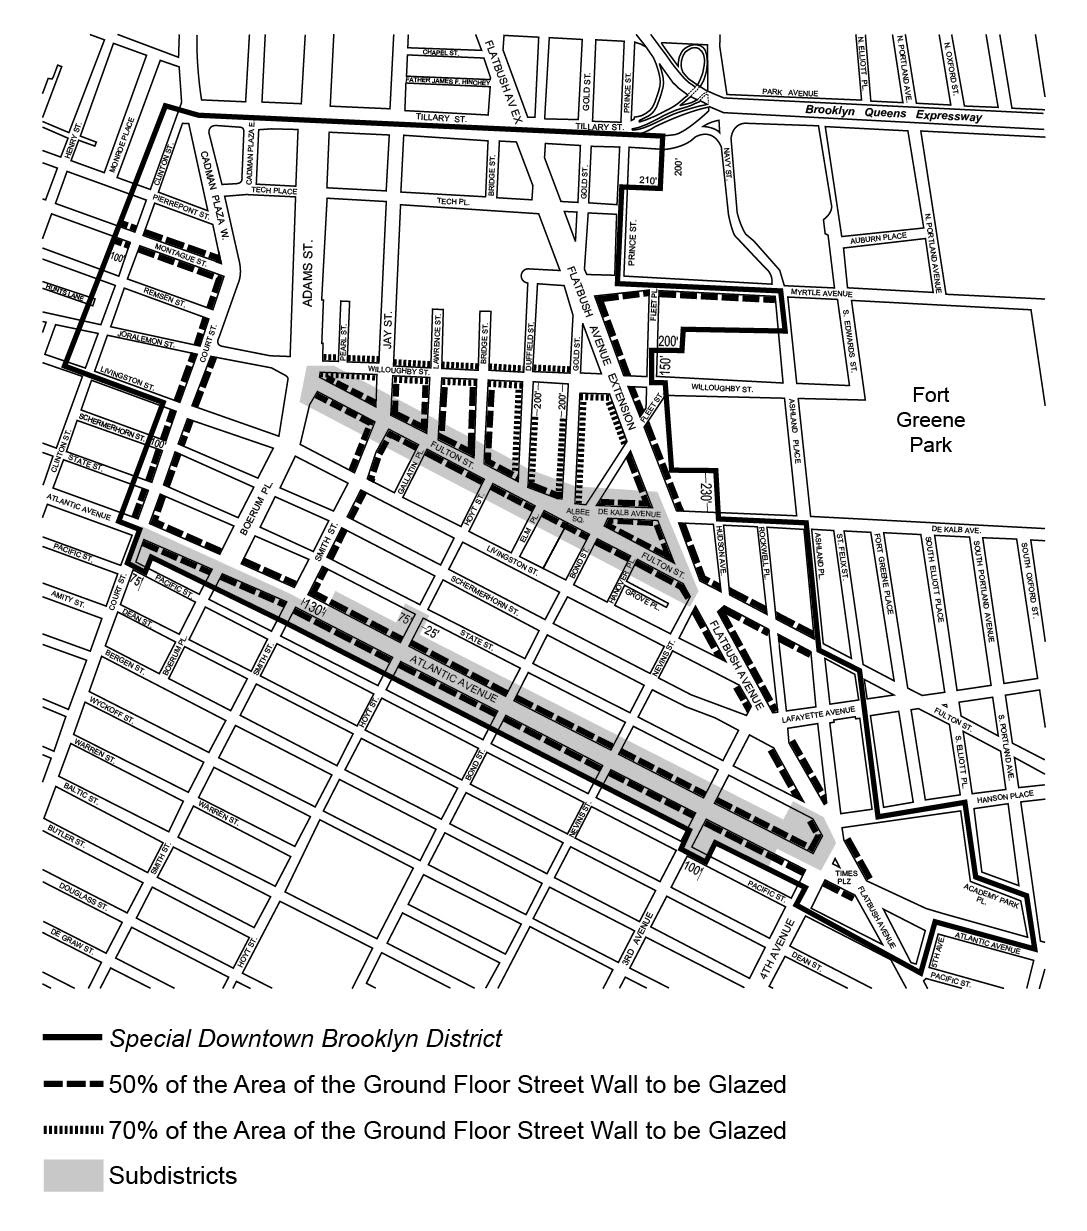 Zoning Resolutions Chapter 1: Special Downtown Brooklyn District Appendix E.2